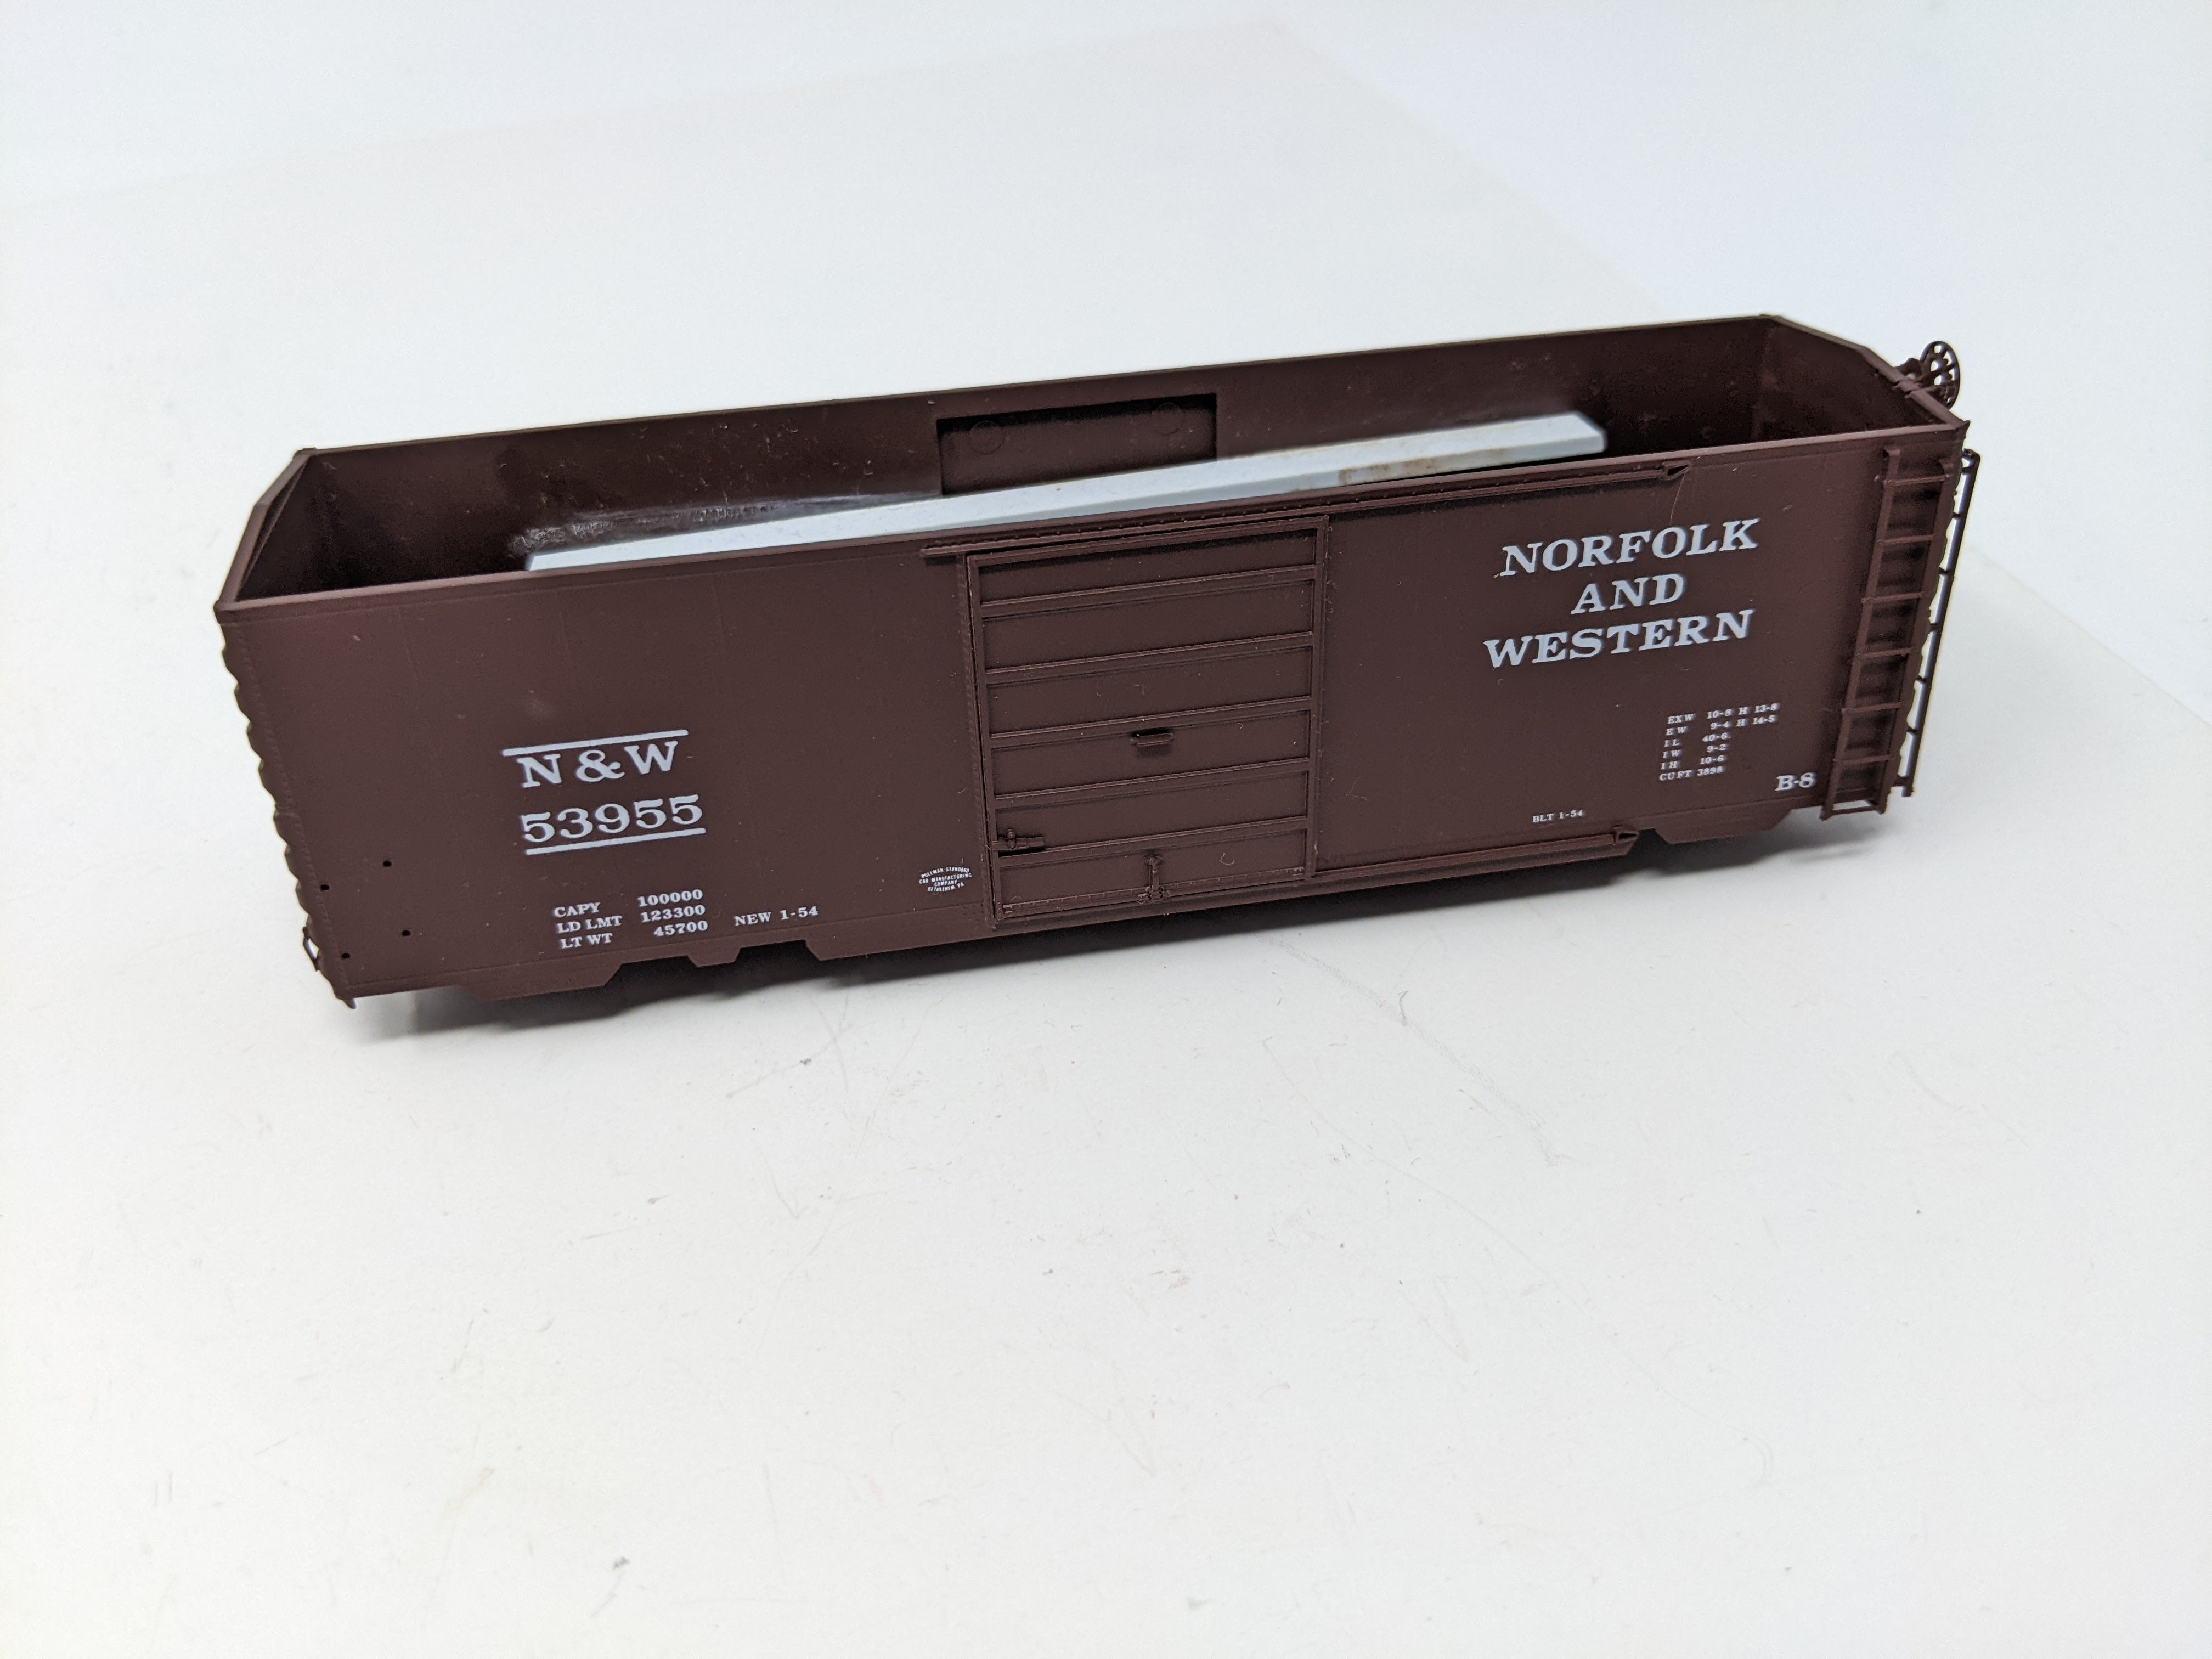 USED Intermountain HO Scale, PS-1 40' Box Car (partially built and incomplete), Norfolk & Western N&W #53955, Read Description